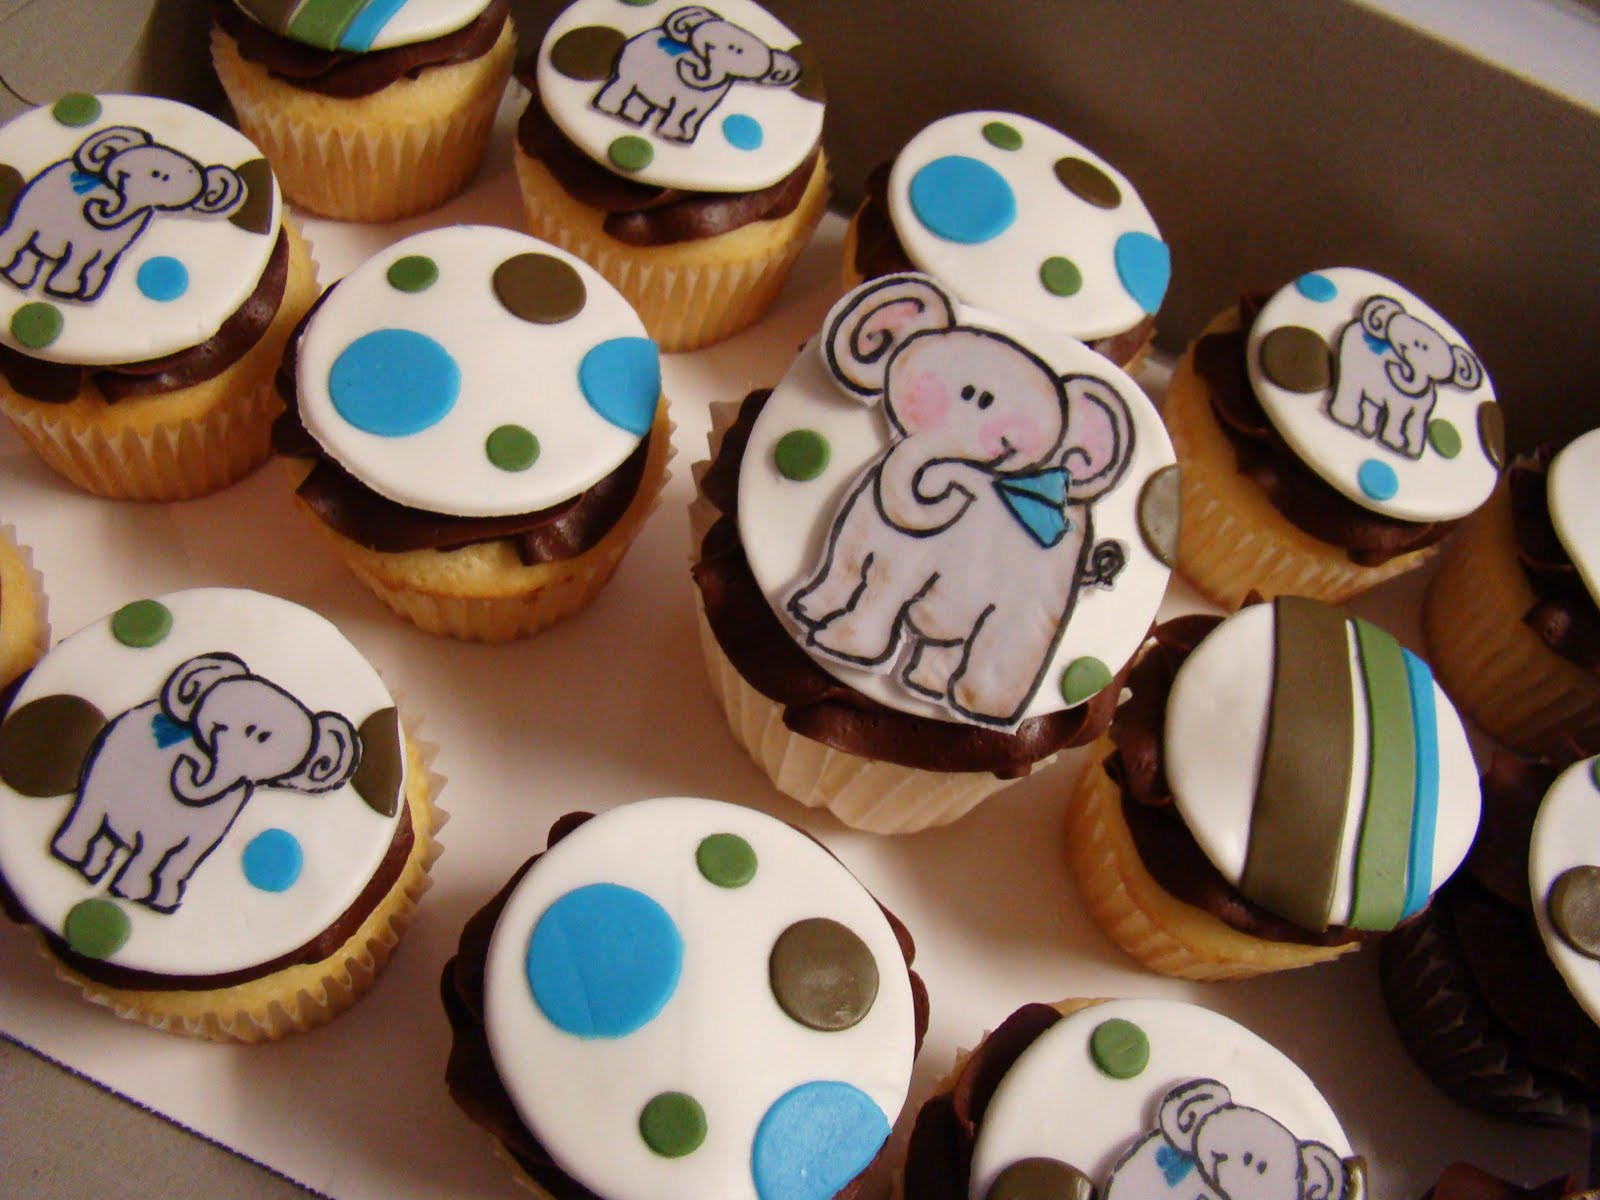 Elephant Baby Shower Cupcakes
 Layers of Love Elephant Baby Shower cupcakes